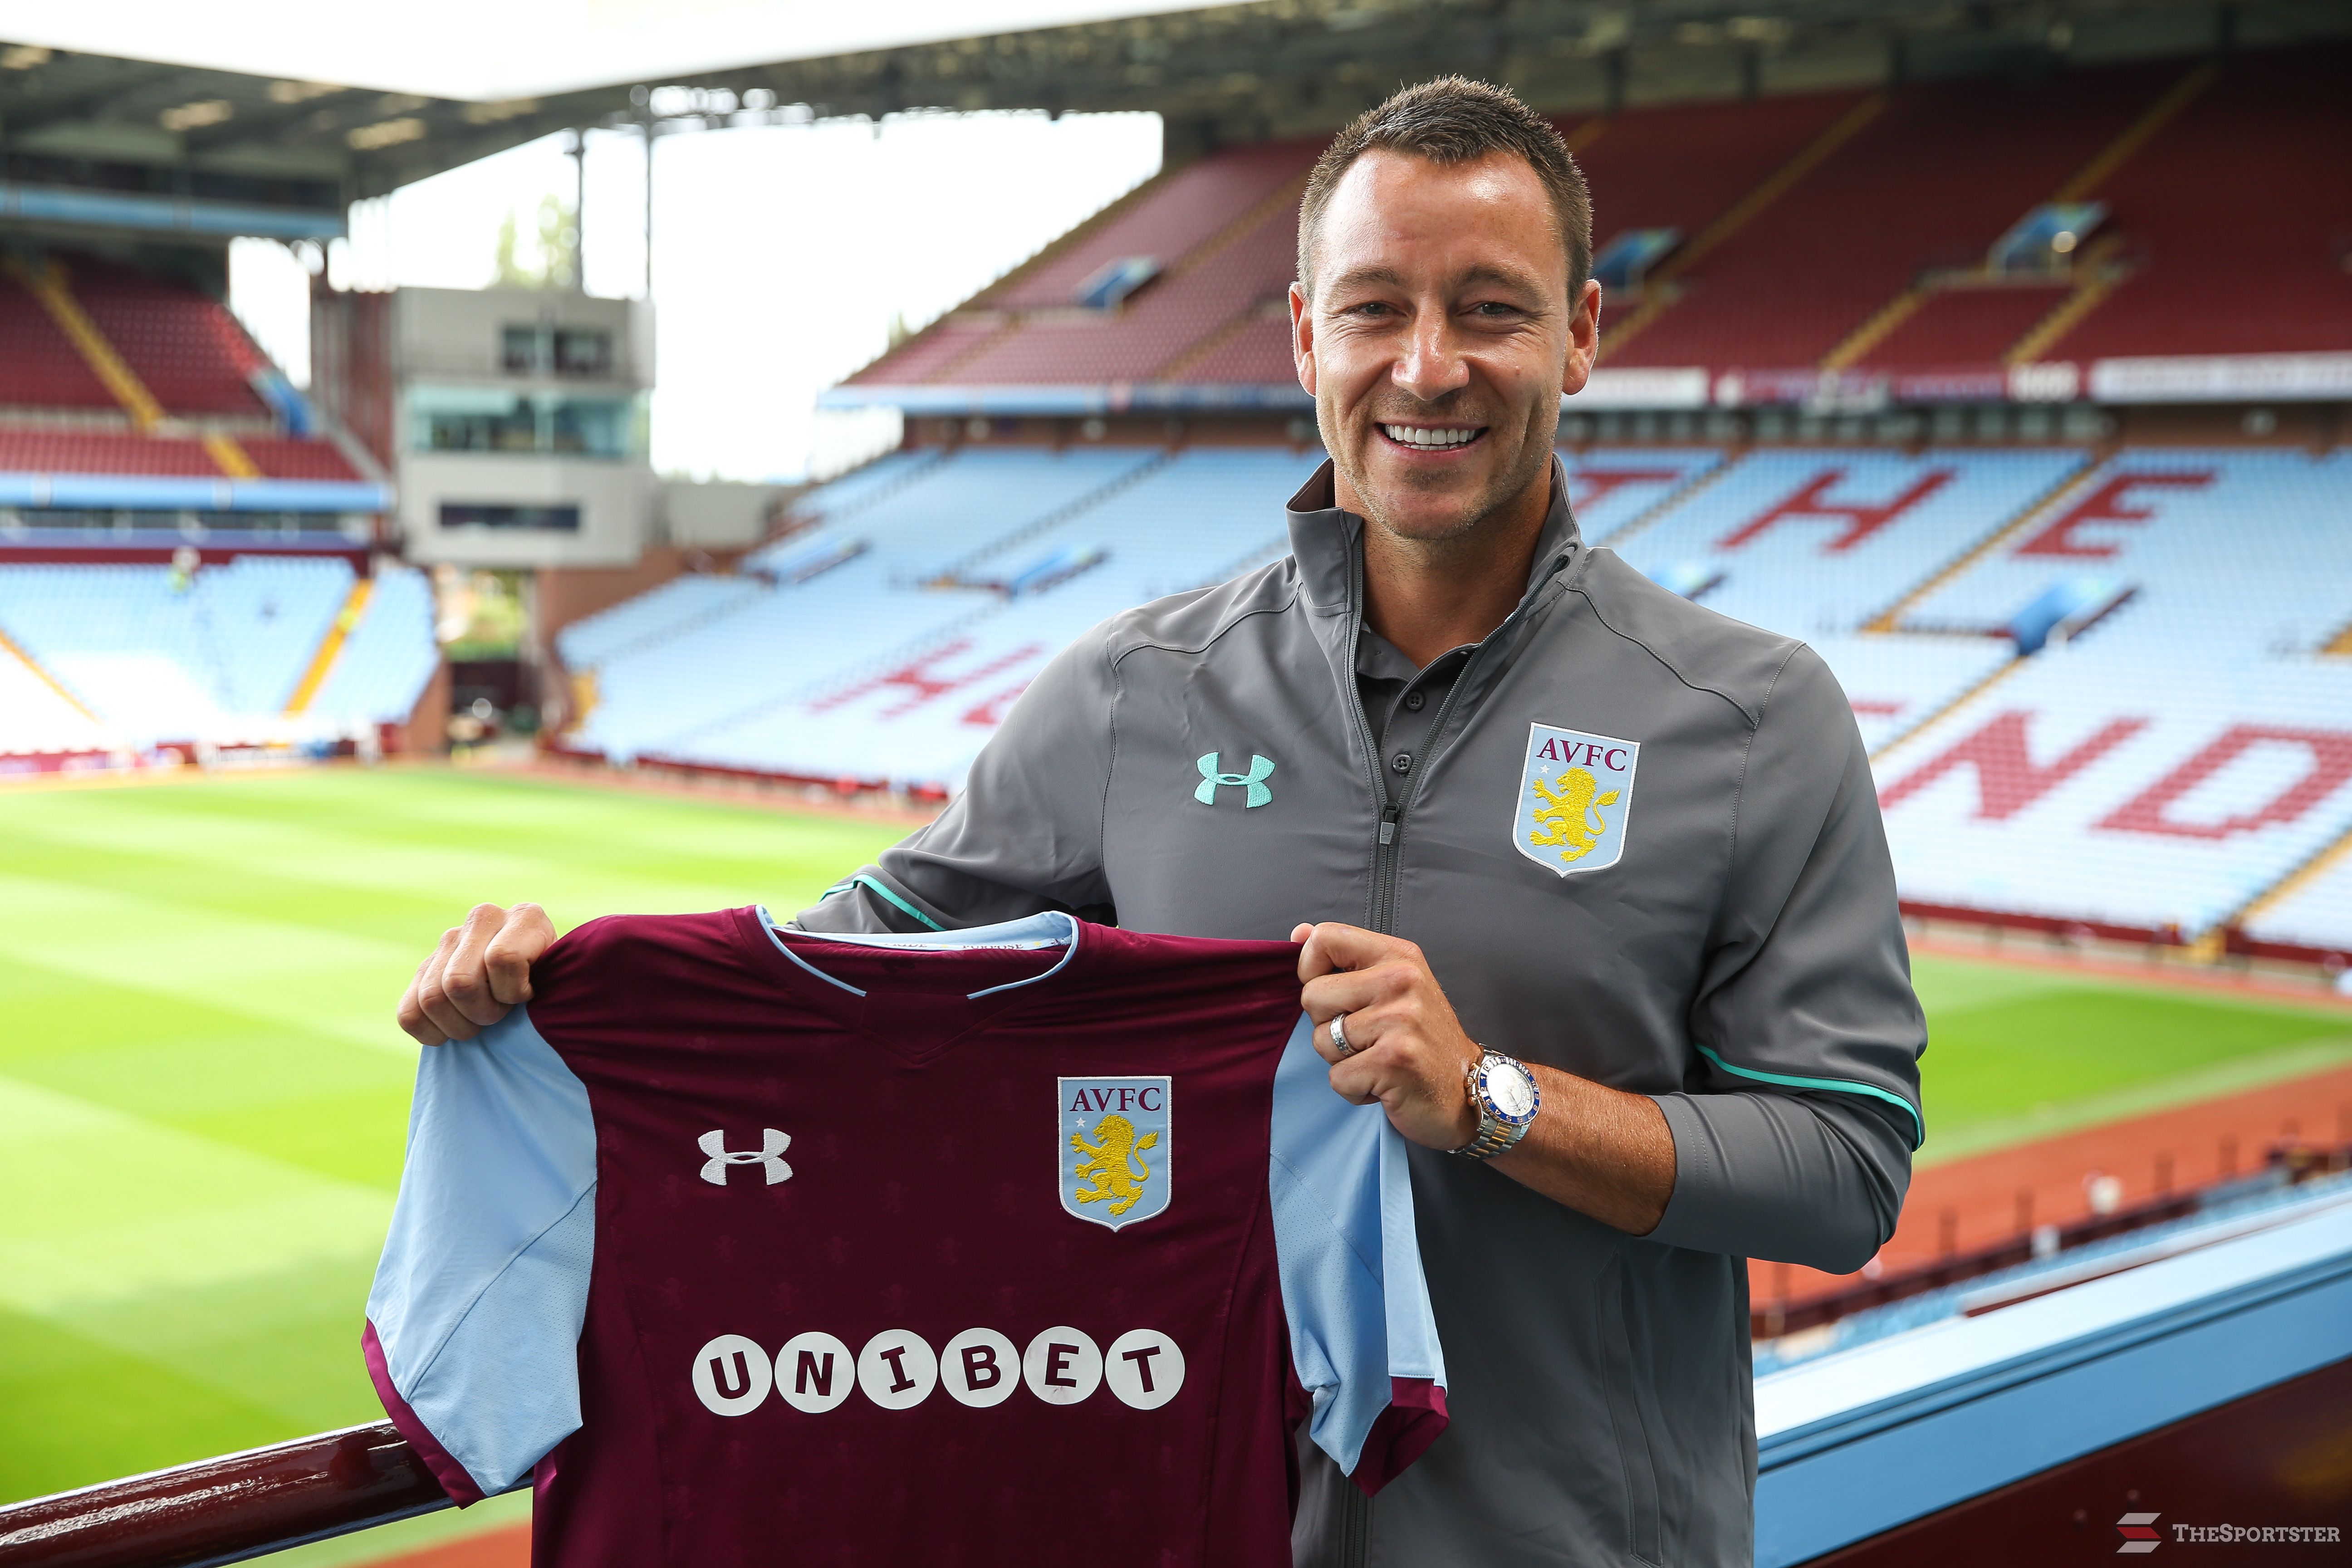 BIRMINGHAM, ENGLAND - JULY 03: Aston Villa's new signing John Terry during the press conference at Villa Park on July 3, 2017 in Birmingham, England. (Photo by Barrington Coombs/Getty Images)